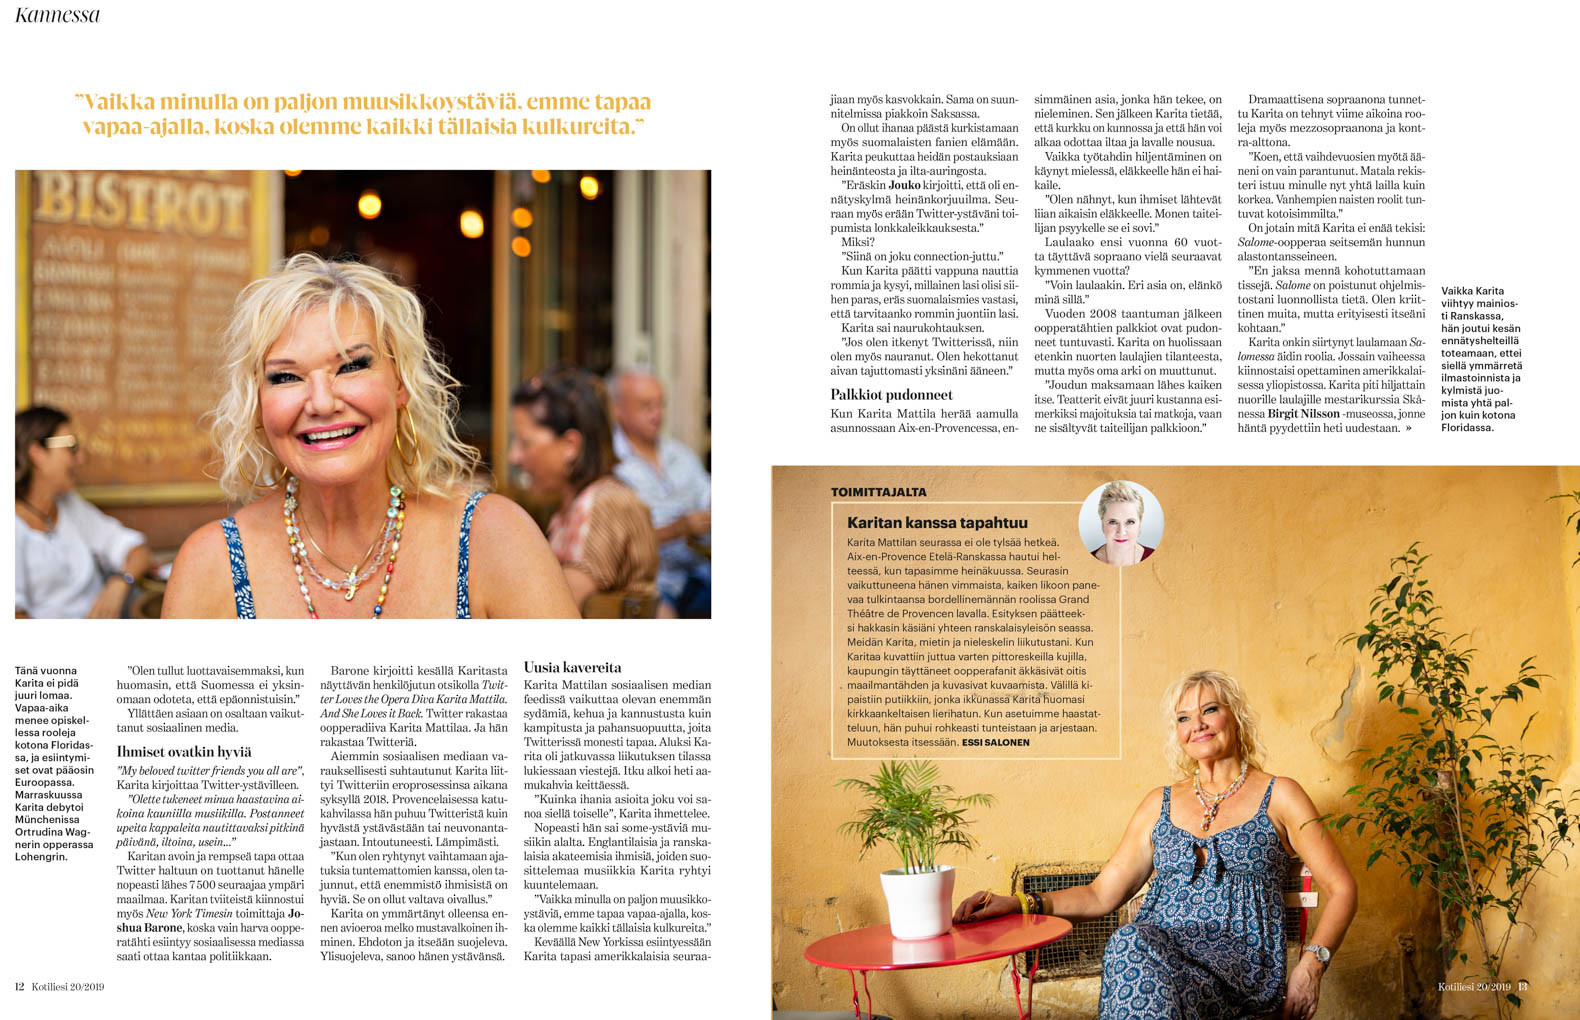 Double-page magazine spread showing text and 2 photographs of Karita Mattila